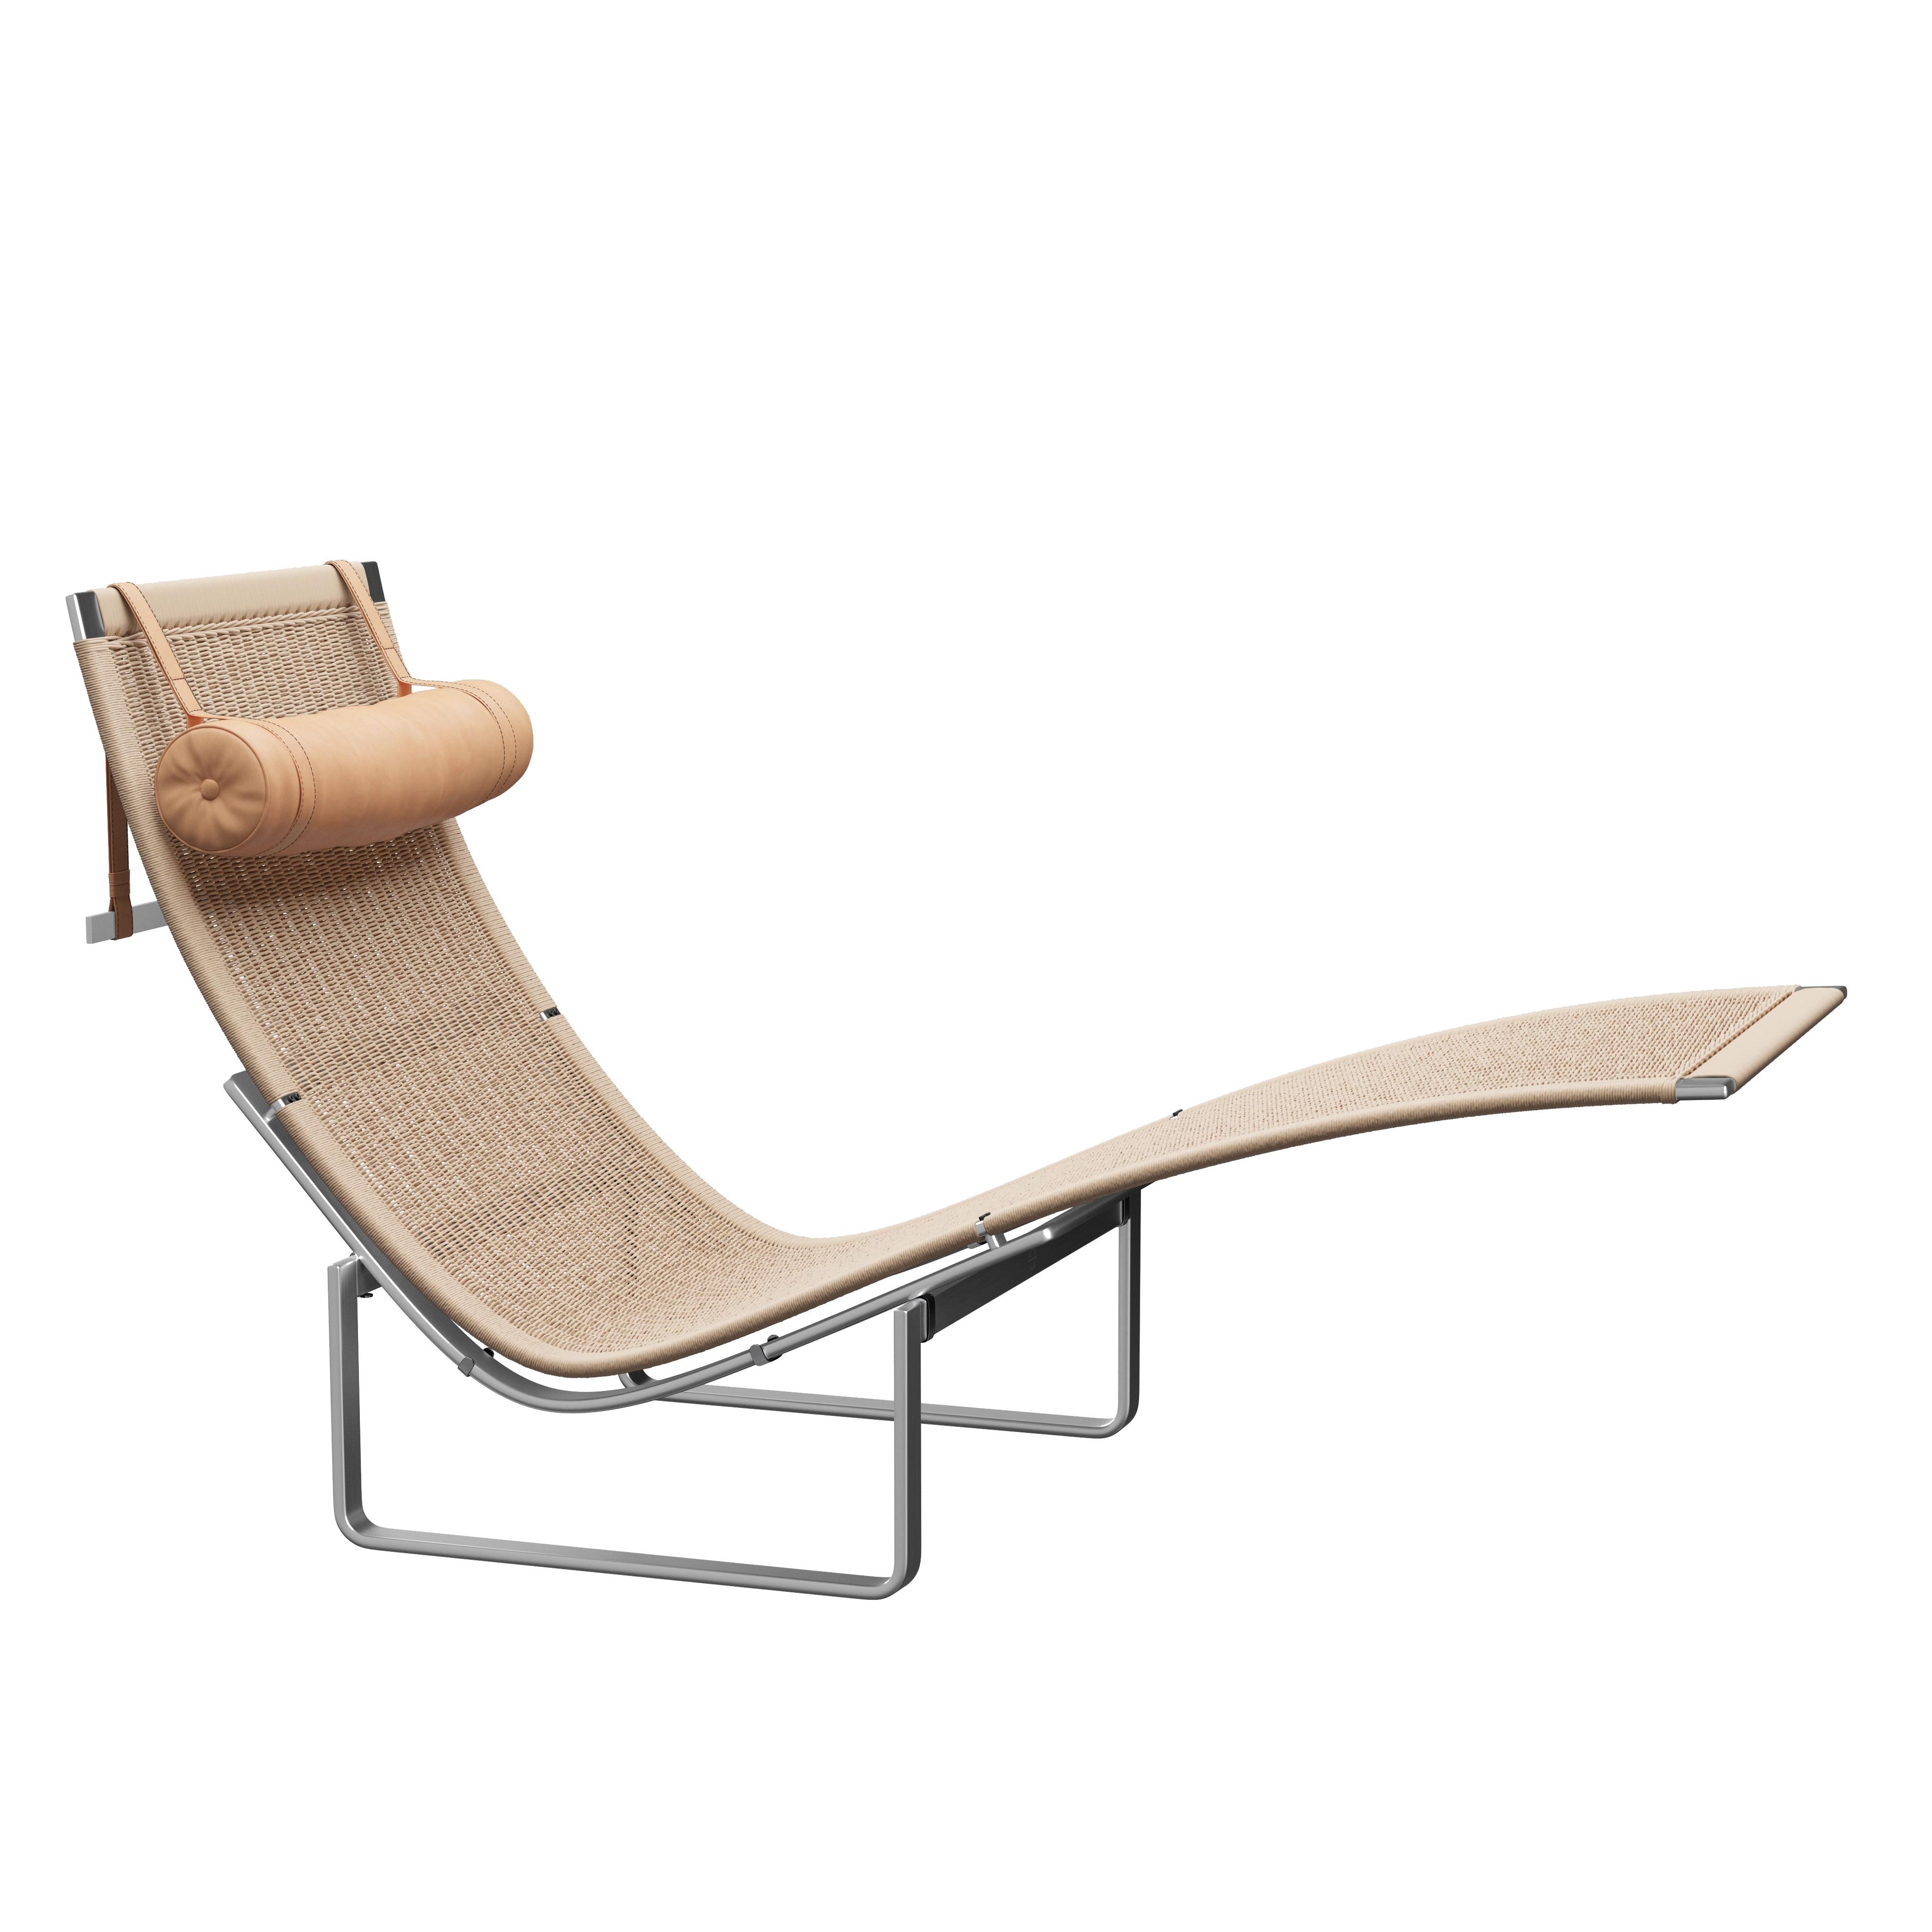 Contemporary Poul Kjærholm 'PK24' Wicker Lounge Chair for Fritz Hansen with Leather Headrest For Sale